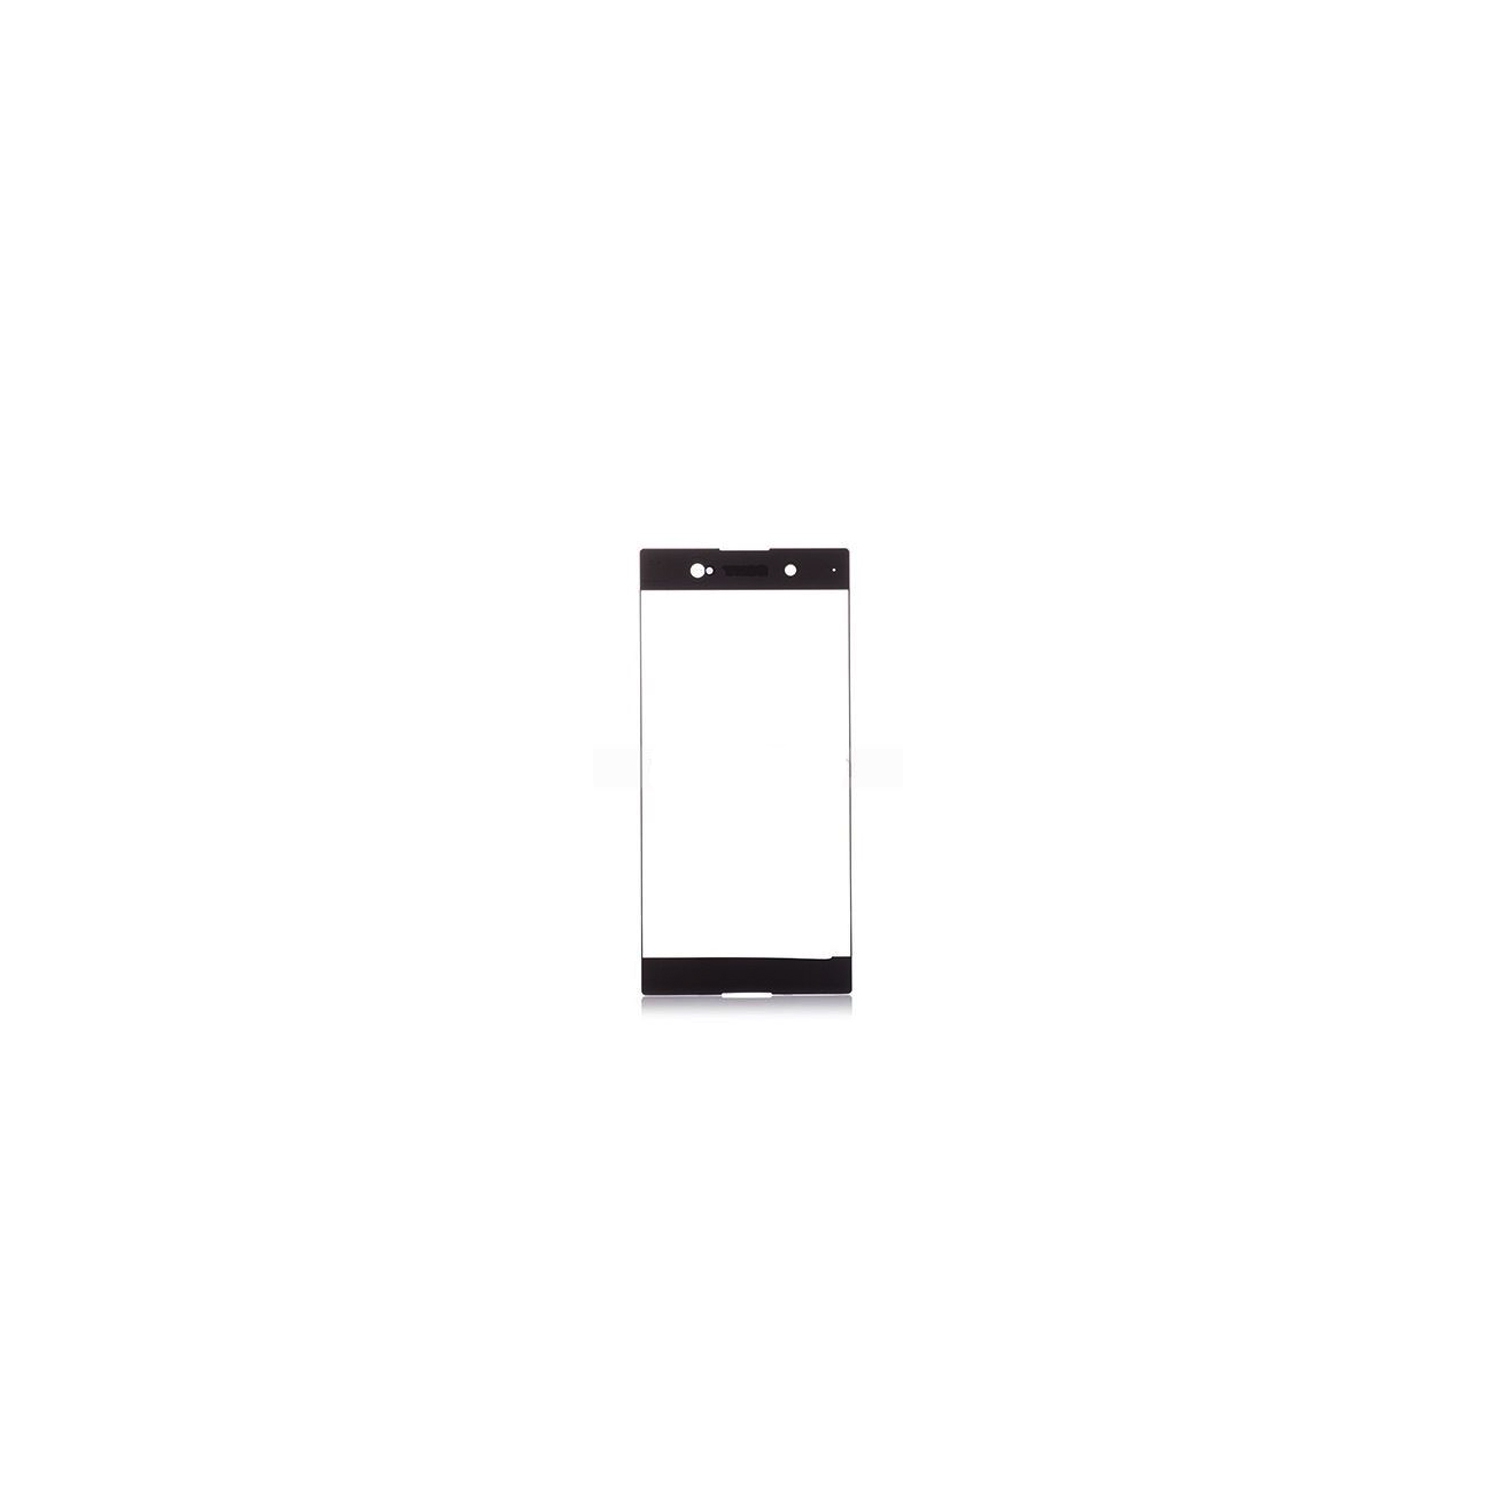 Sony Xperia XA1 Ultra G3223 Front Glass Top Glass Replacement - Black